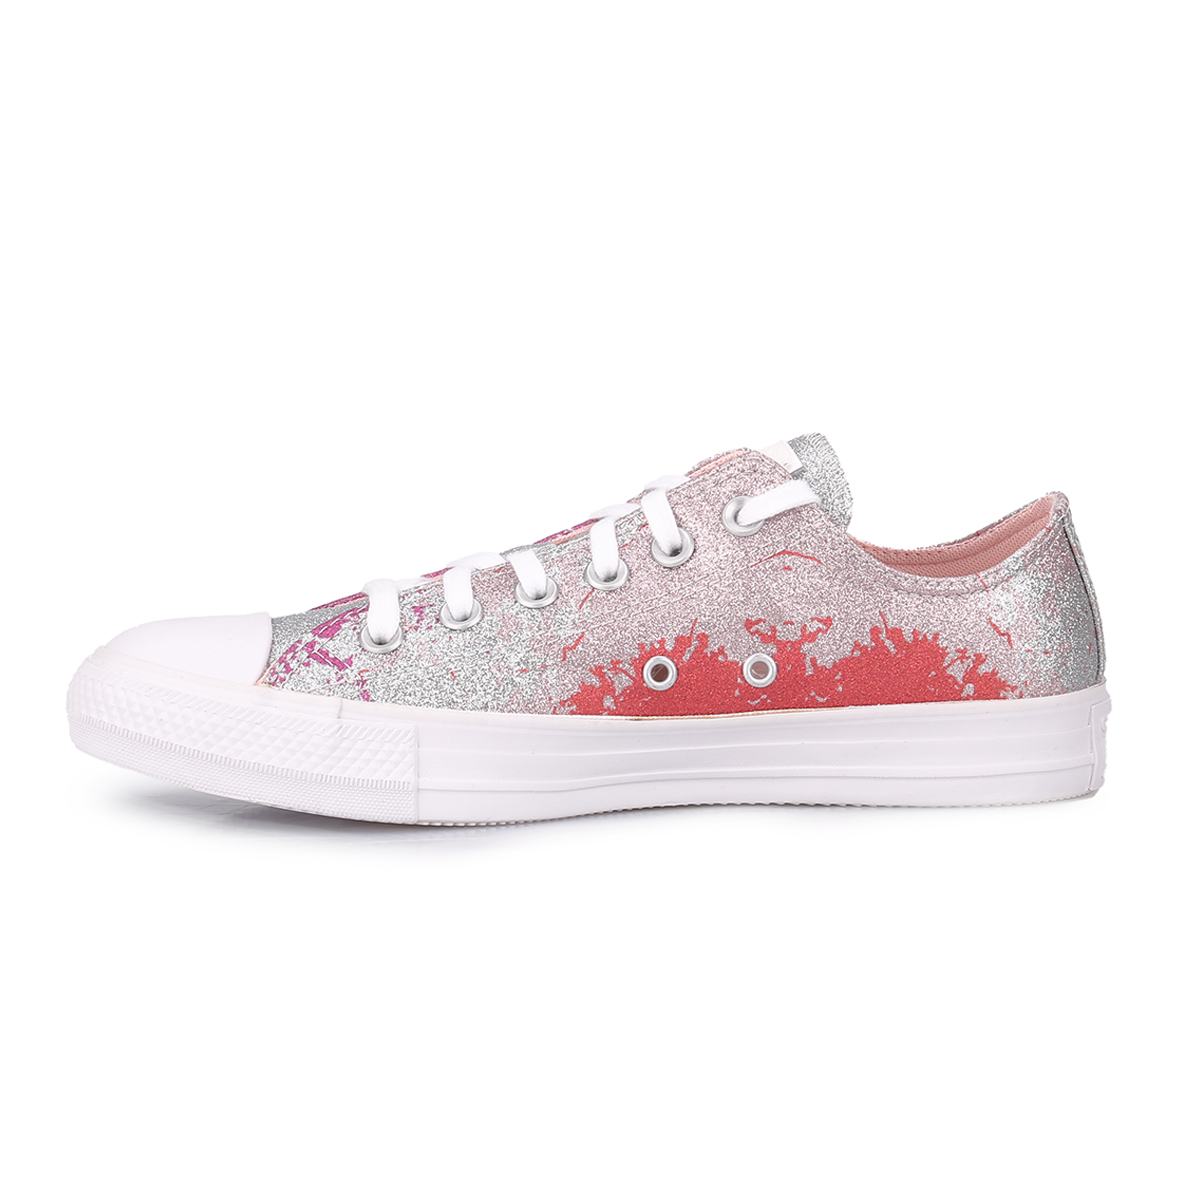 Zapatillas Converse Chuck Taylor All Star Ox Prime,  image number null